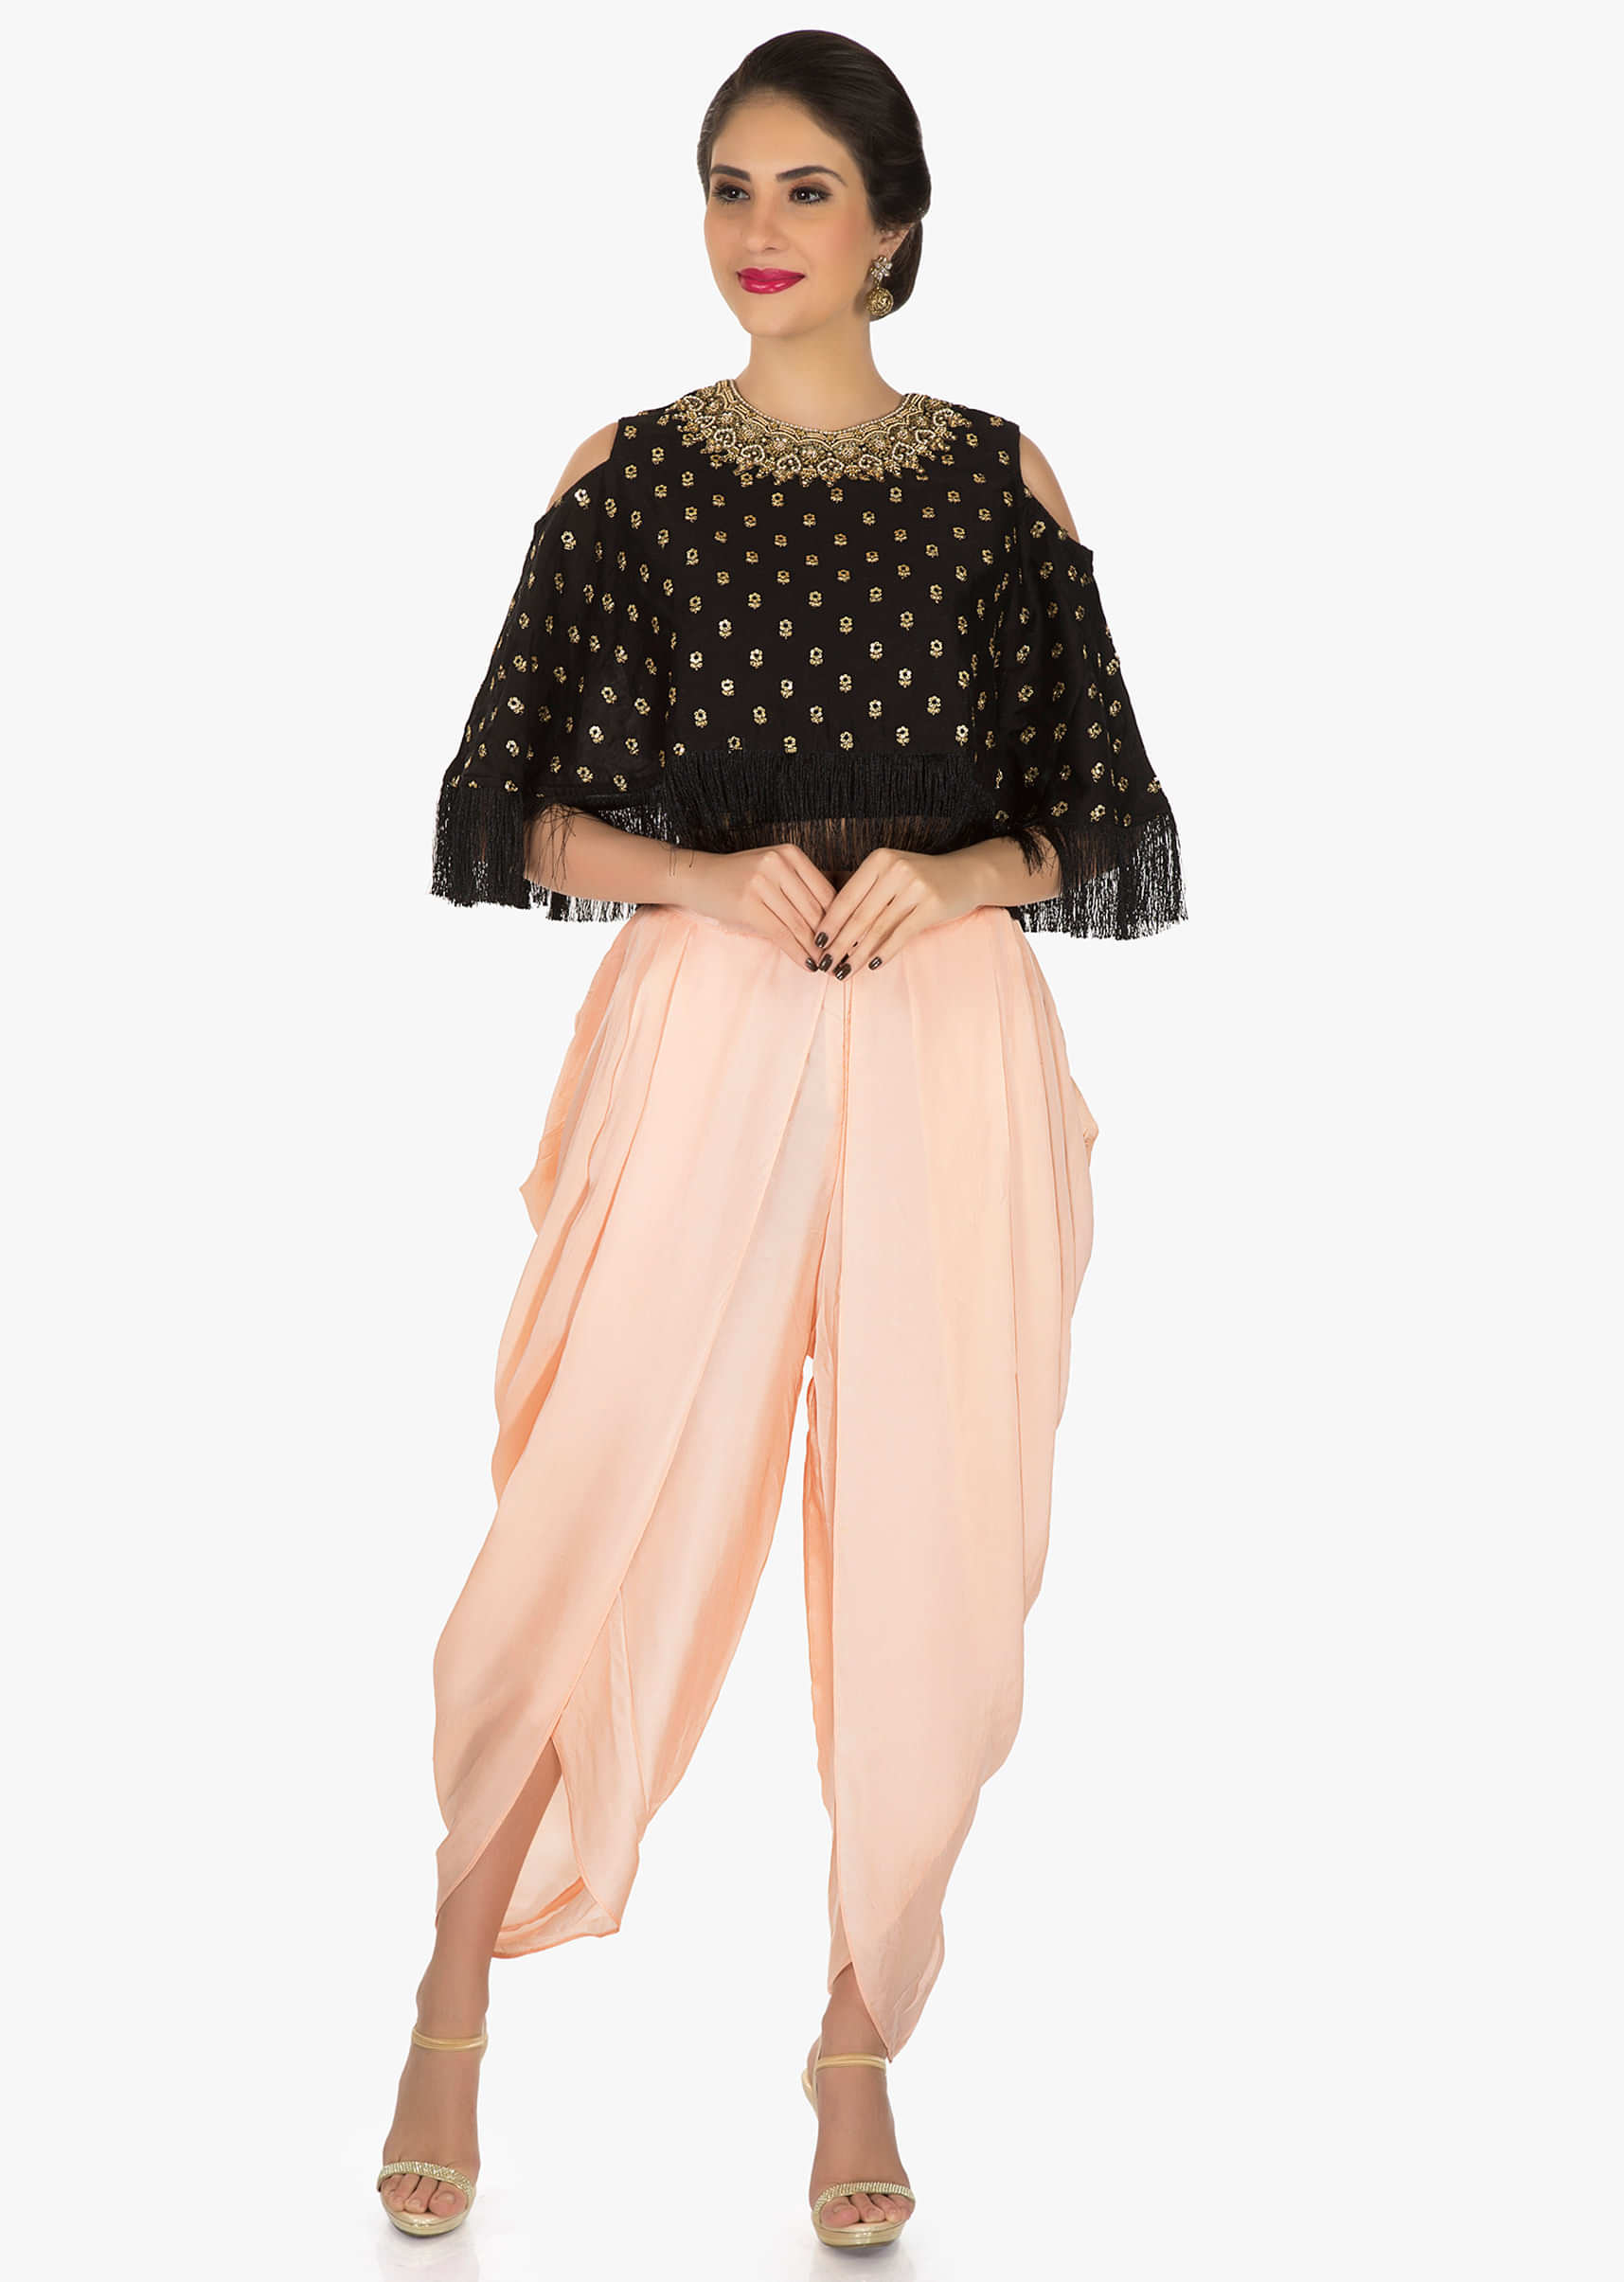 Black Cape And Peach Dhoti Suit With Moti Sequin Work Online - Kalki Fashion